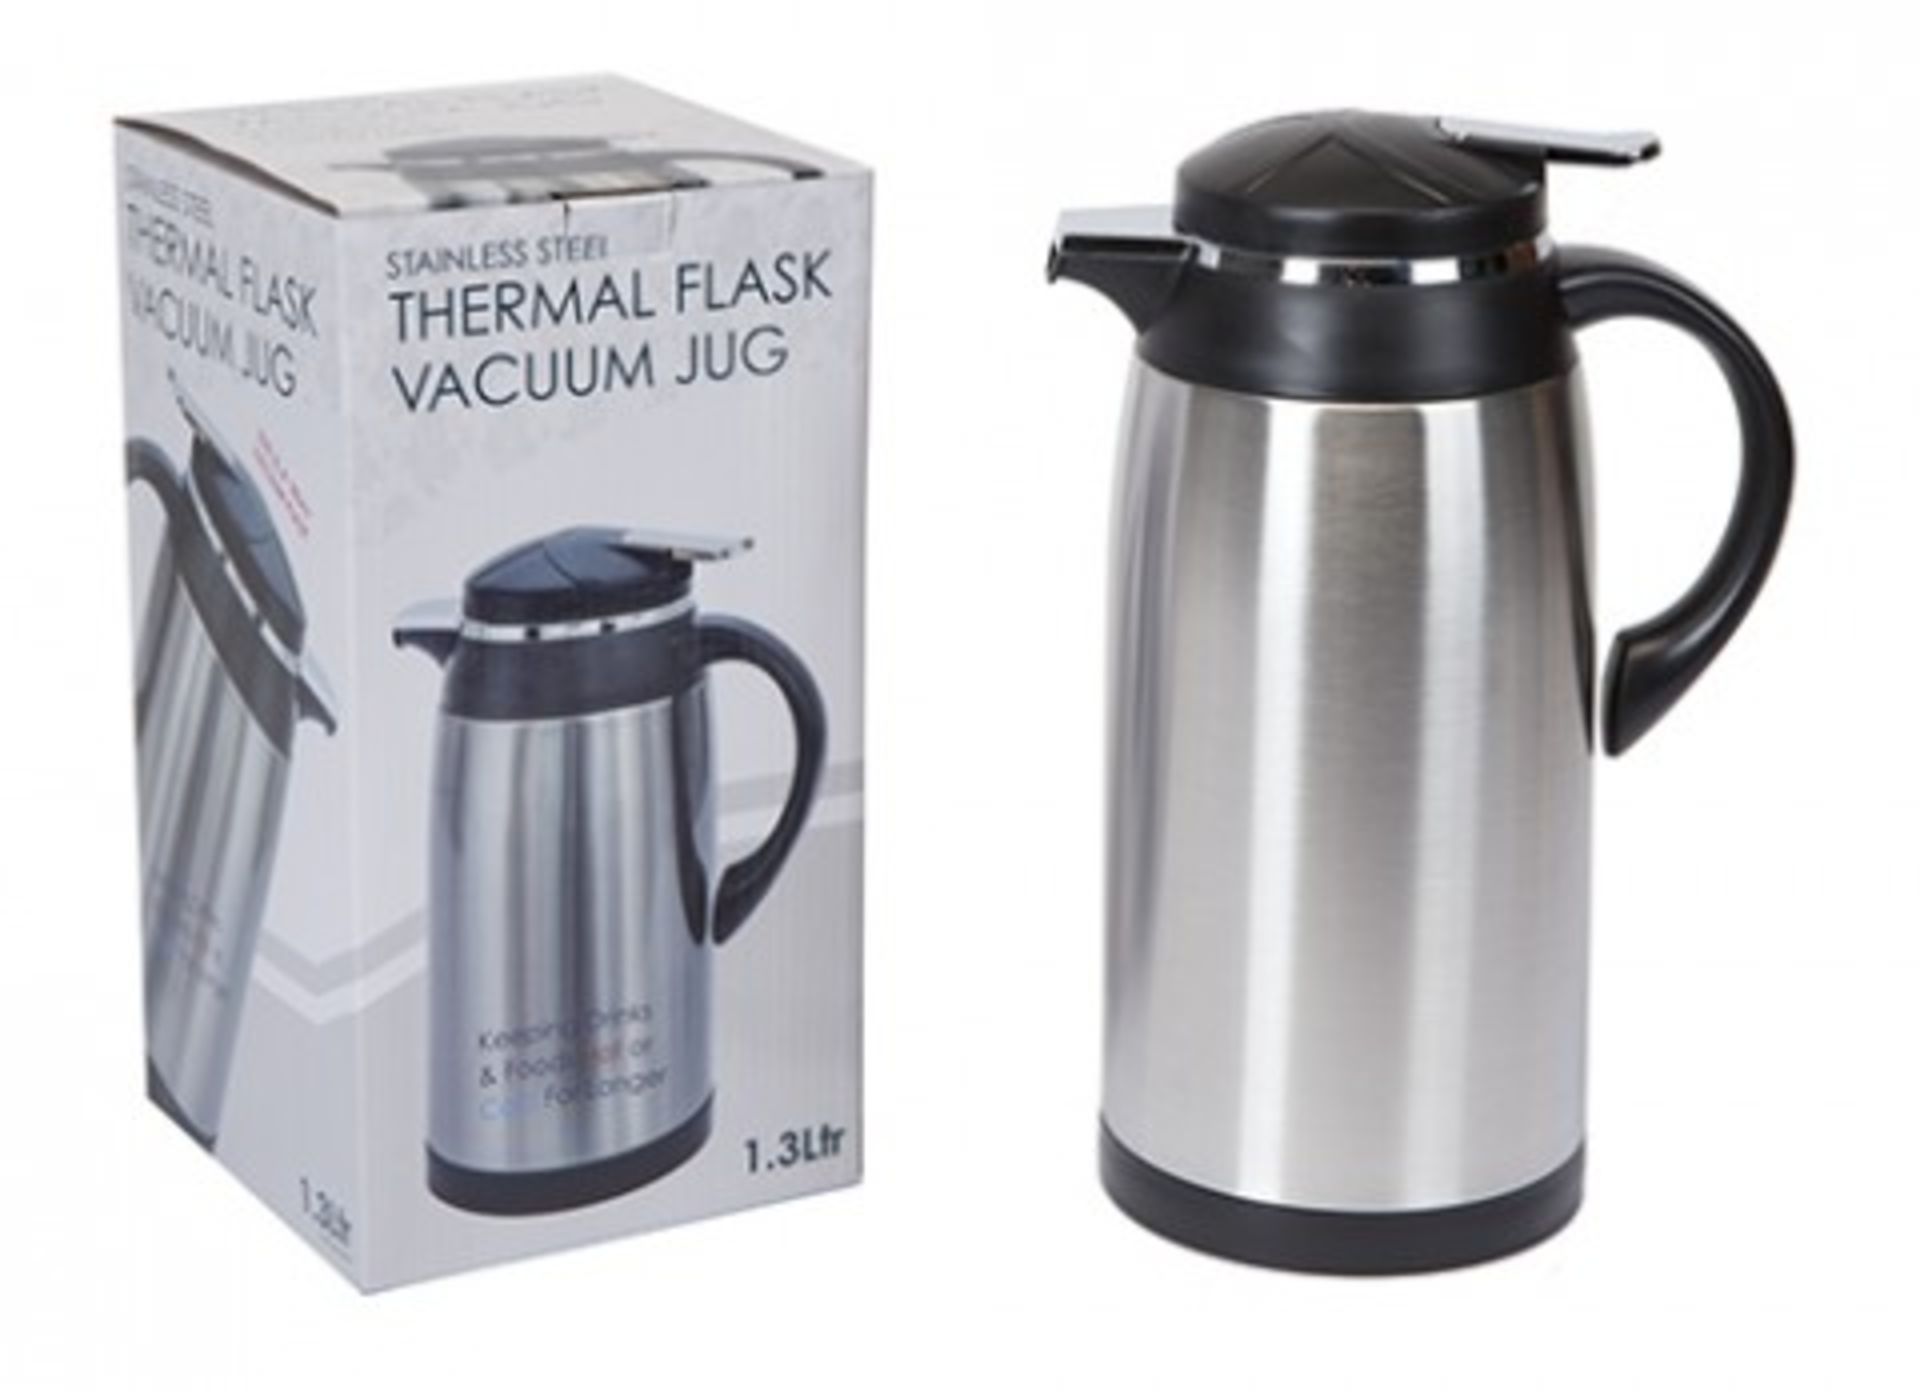 V *TRADE QTY* Brand New Stainless Steel Thermal Flask Vacuum Jug X 4 YOUR BID PRICE TO BE MULTIPLIED